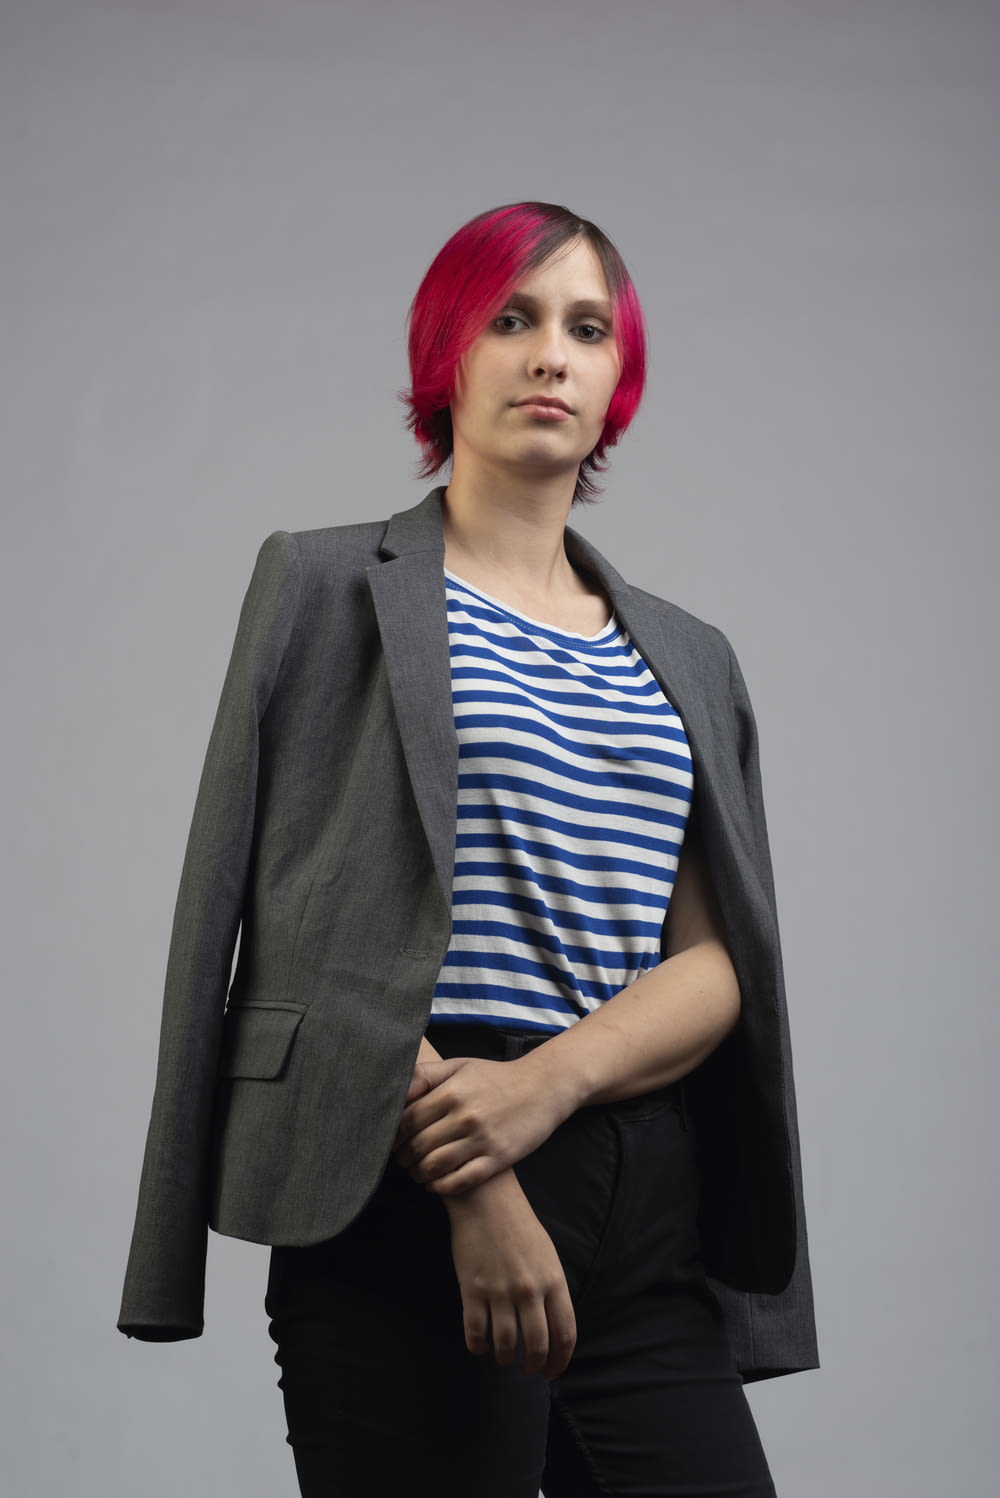 a woman with red hair wearing a gray jacket